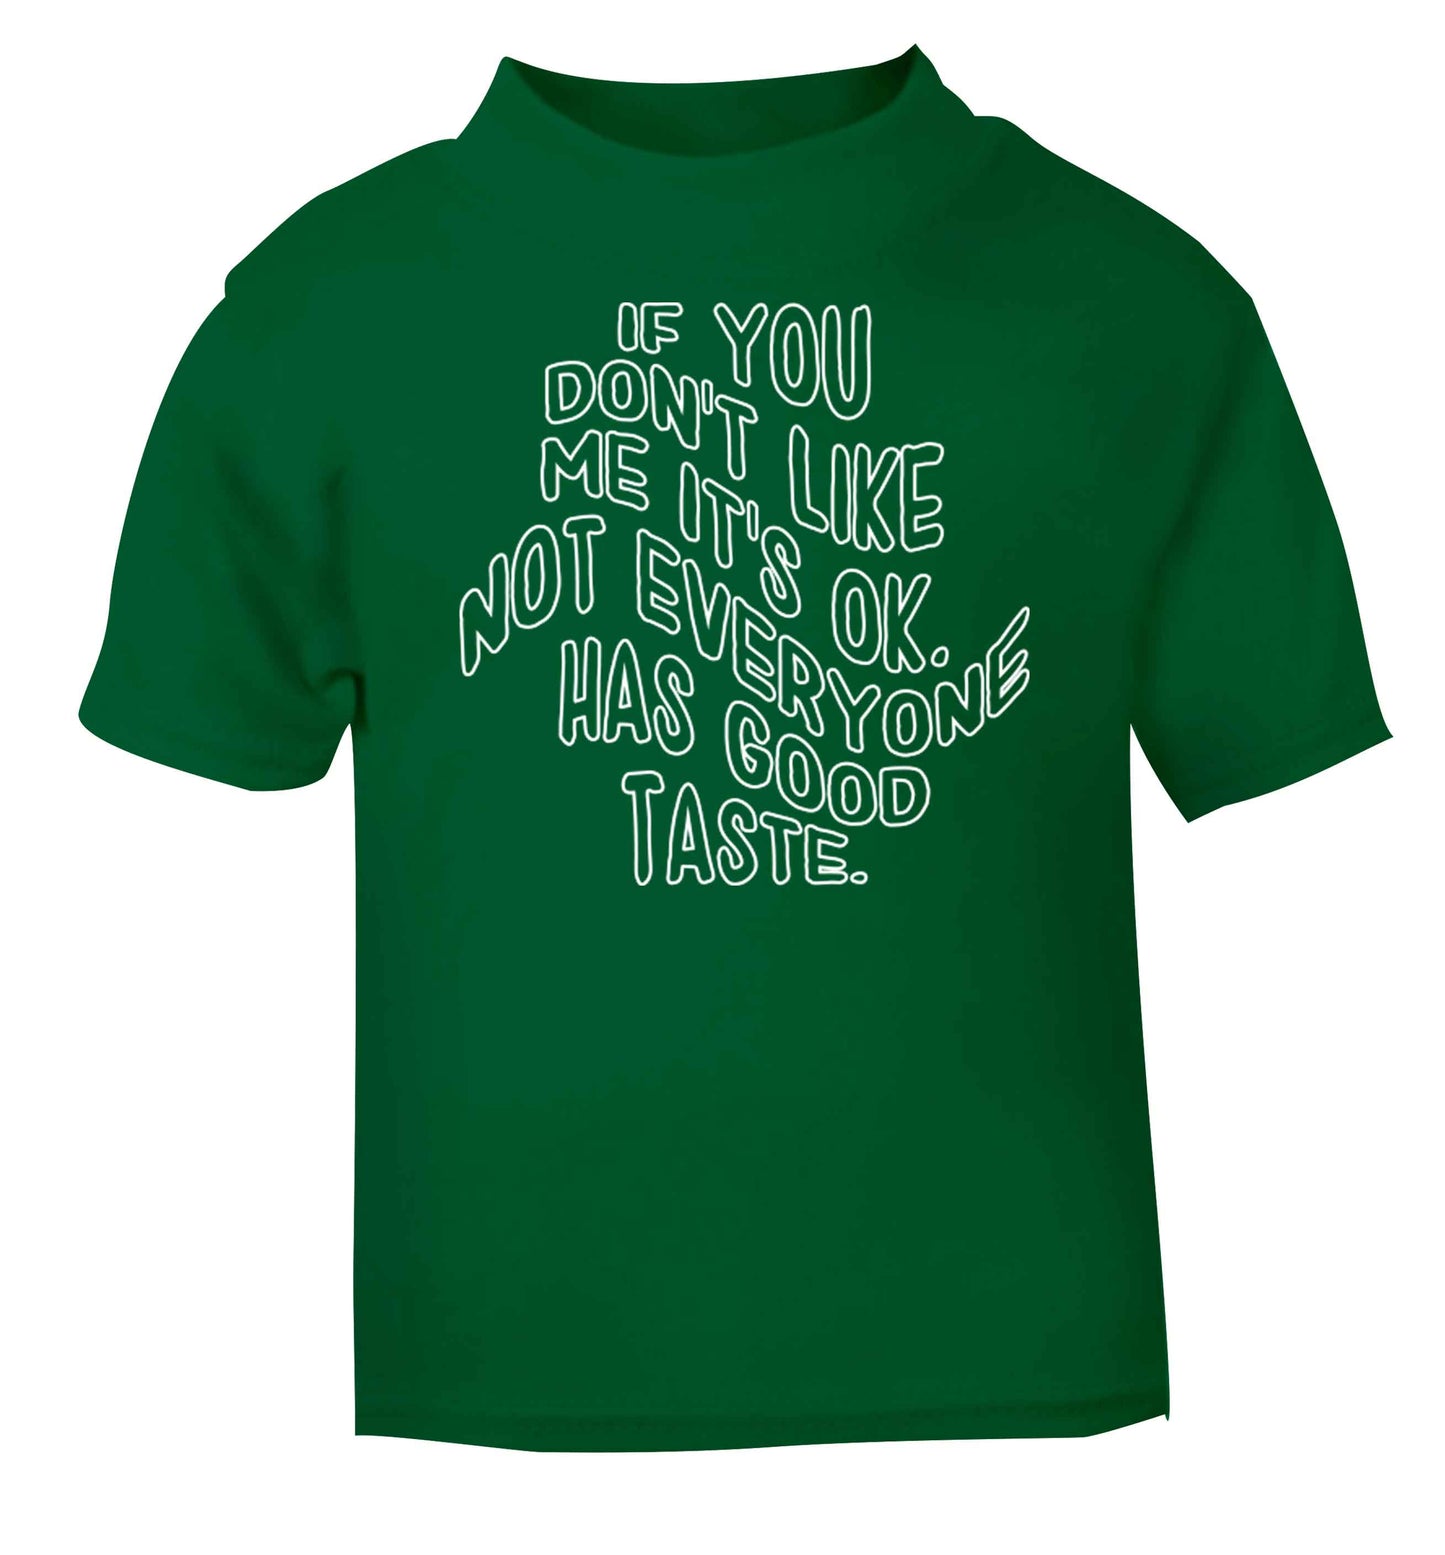 If you don't like me it's ok not everyone has good taste green baby toddler Tshirt 2 Years